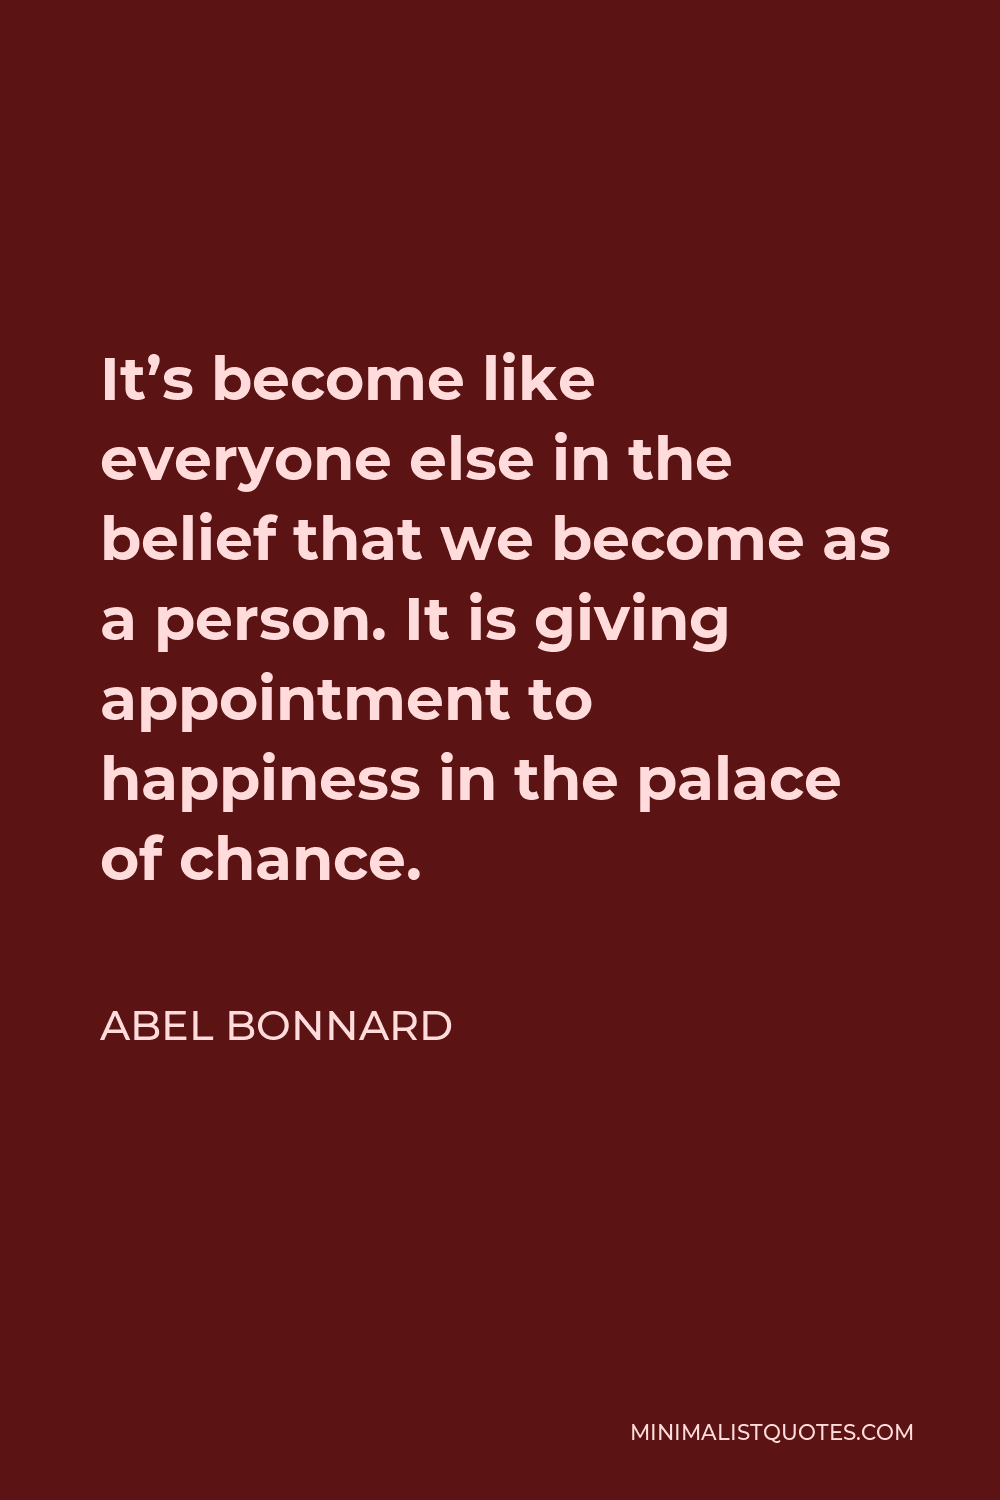 Abel Bonnard Quote - It’s become like everyone else in the belief that we become as a person. It is giving appointment to happiness in the palace of chance.